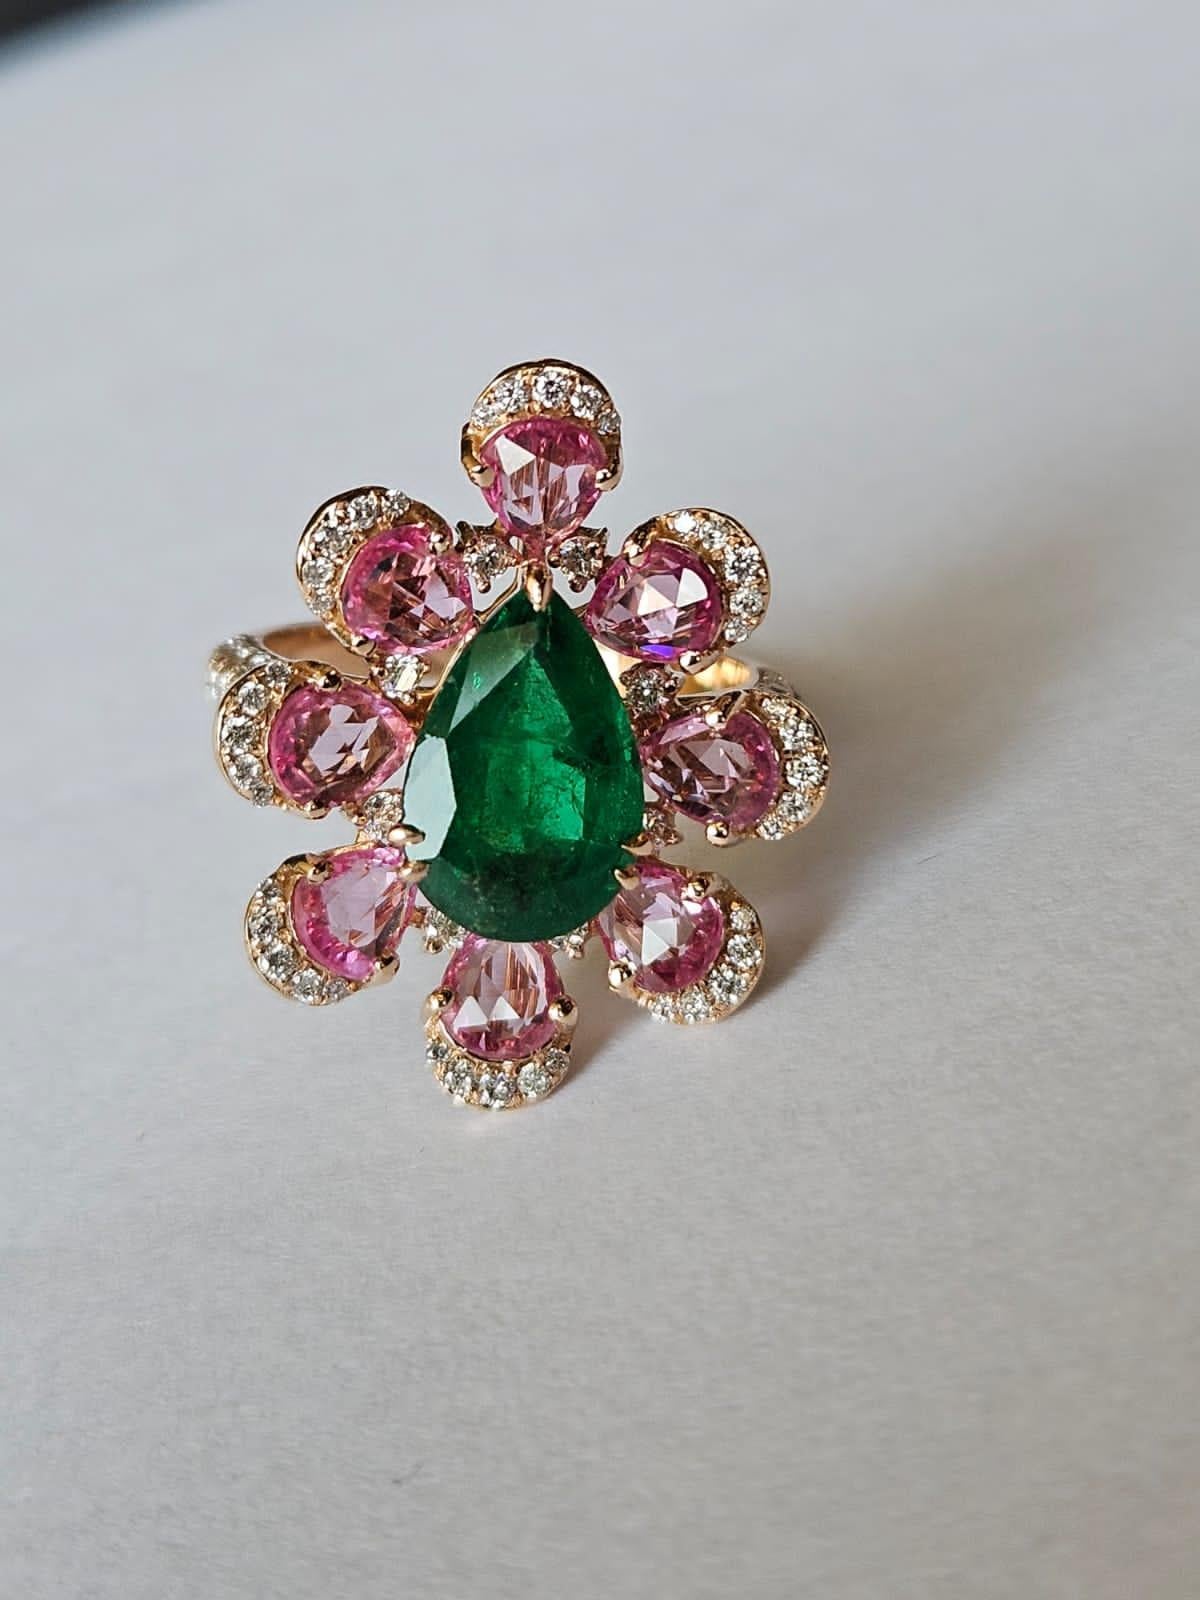 Women's or Men's Set in 18K Gold, natural Zambian Emerald, Pink Sapphire & Diamonds Cocktail Ring